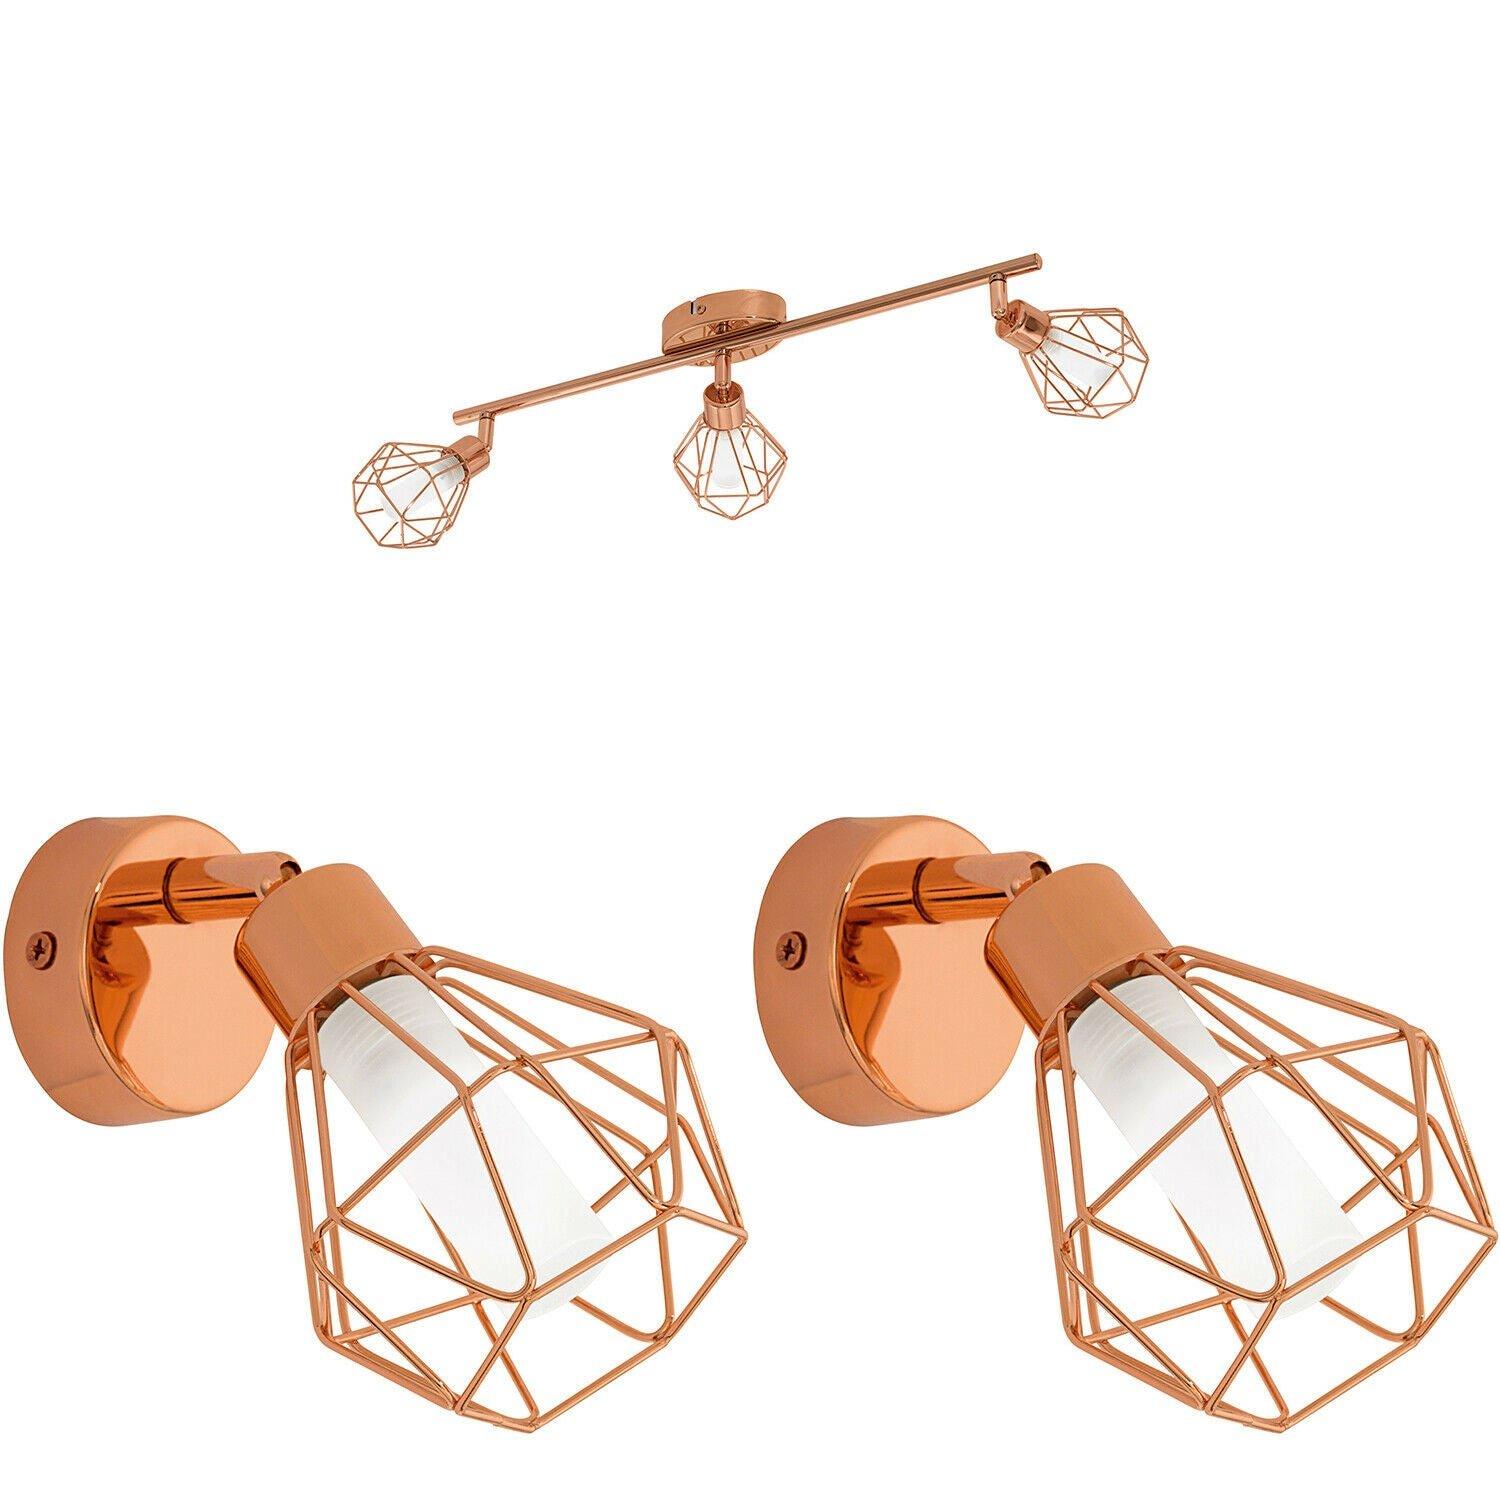 Ceiling Spot Light & 2x Matching Wall Lights Copper Geometric Wire Cage Shade